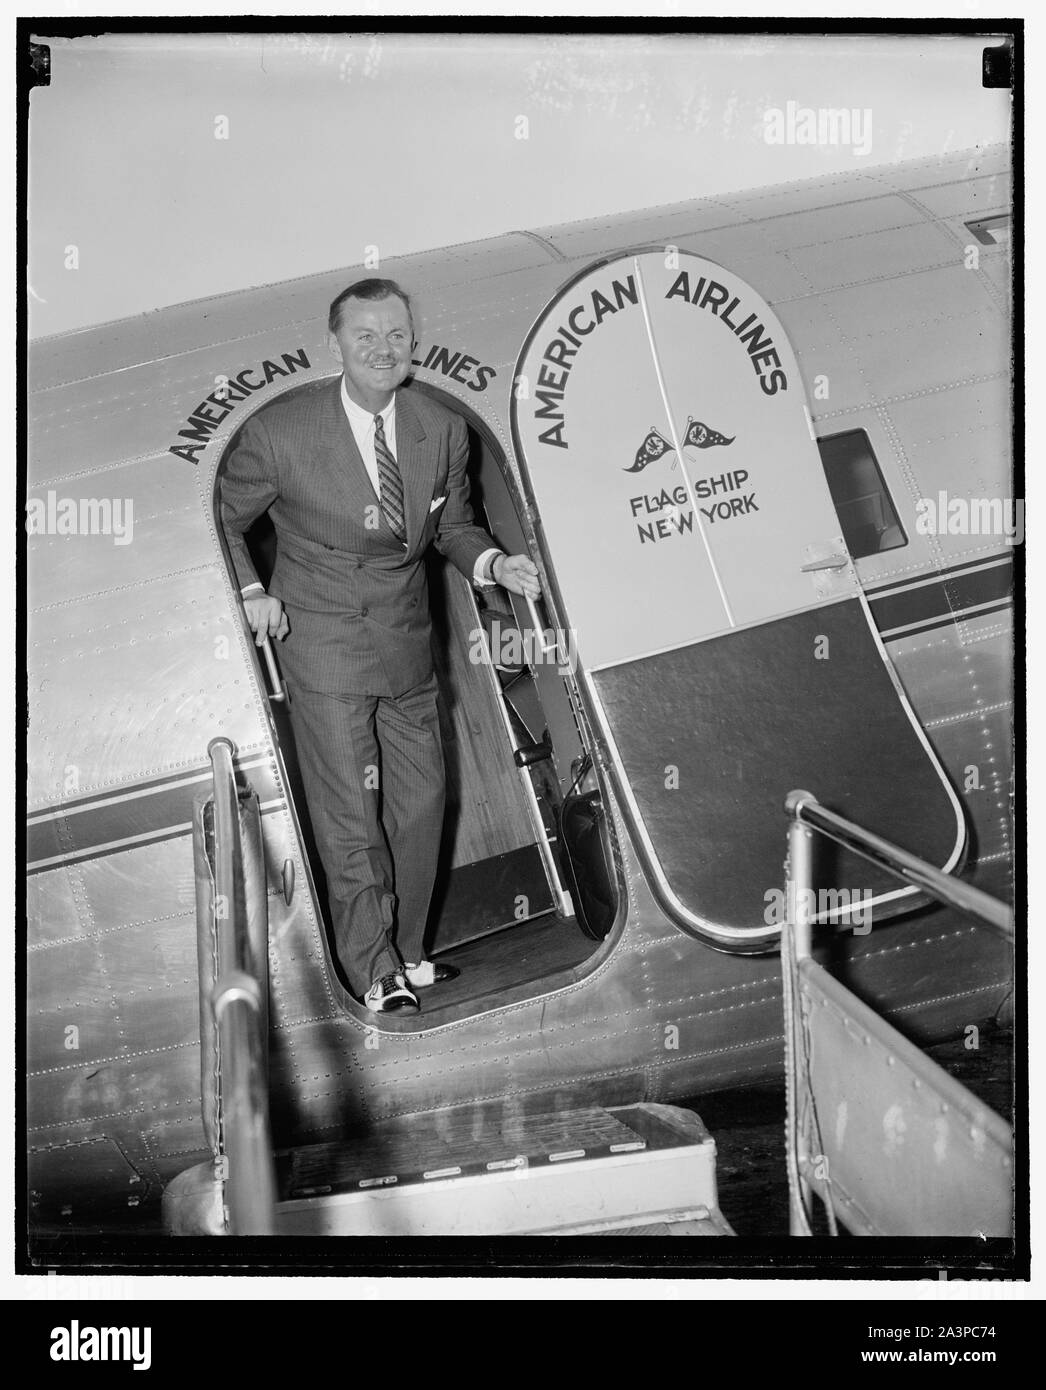 Song-bird pauses at Washington airport. Washington, D.C., July 11. Enroute from California, Lawrence Tibbett, song-bird star of 'The Circle,' well known radio program, stepped out of the flag ship of the American Airlines to take a breath of Washington Air before going on to New York. From there he will continue to Wilton, Conn., for a well earned vacation Stock Photo